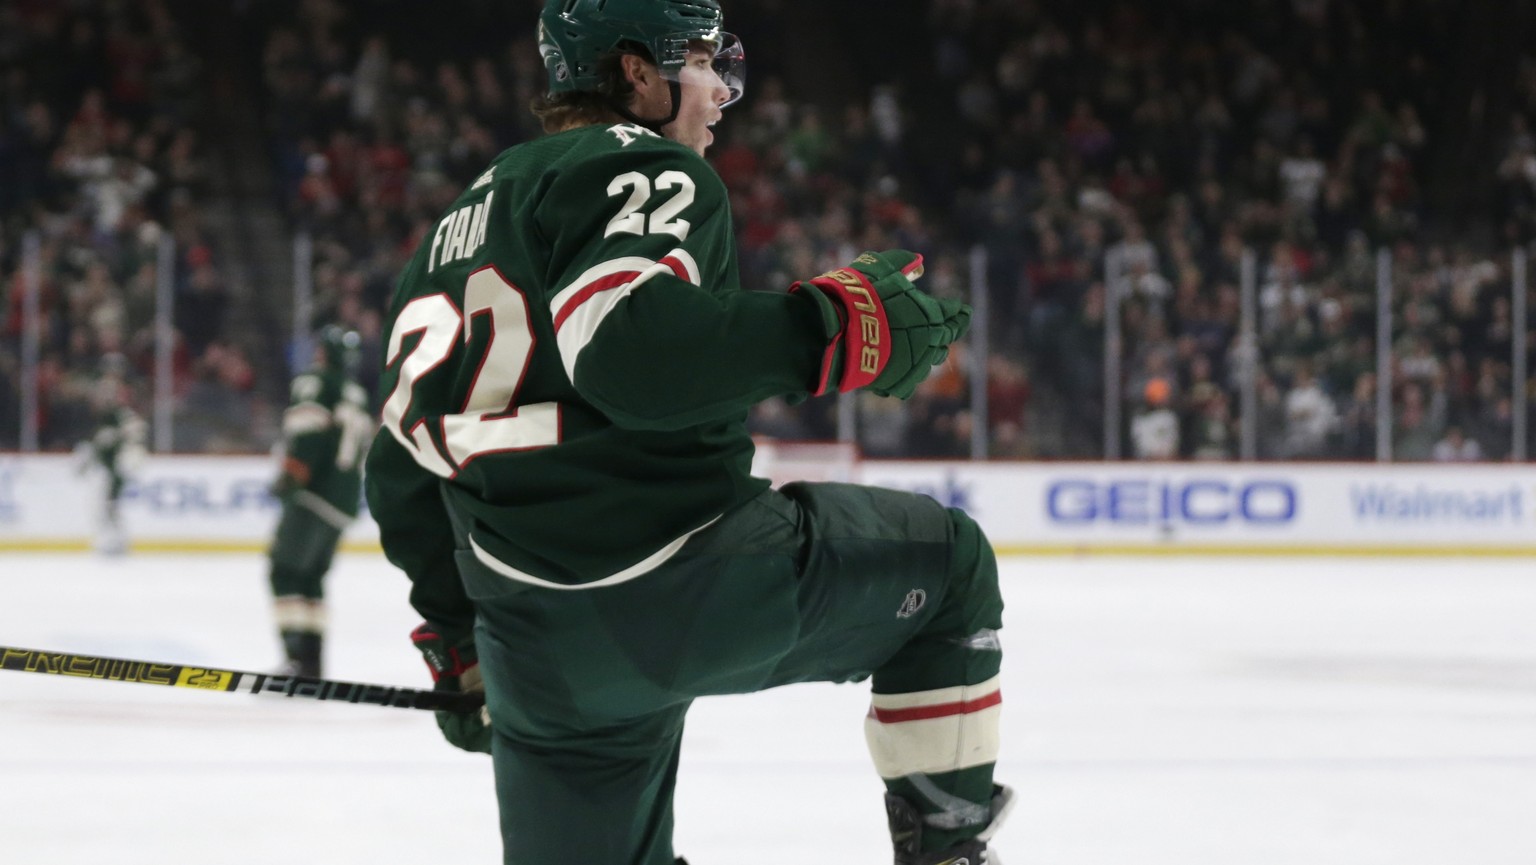 Minnesota Wild left wing Kevin Fiala celebrates his goal against the Nashville Predators during the first period of an NHL hockey game Tuesday, March 3, 2020, in St. Paul, Minn. (AP Photo/Andy Clayton ...